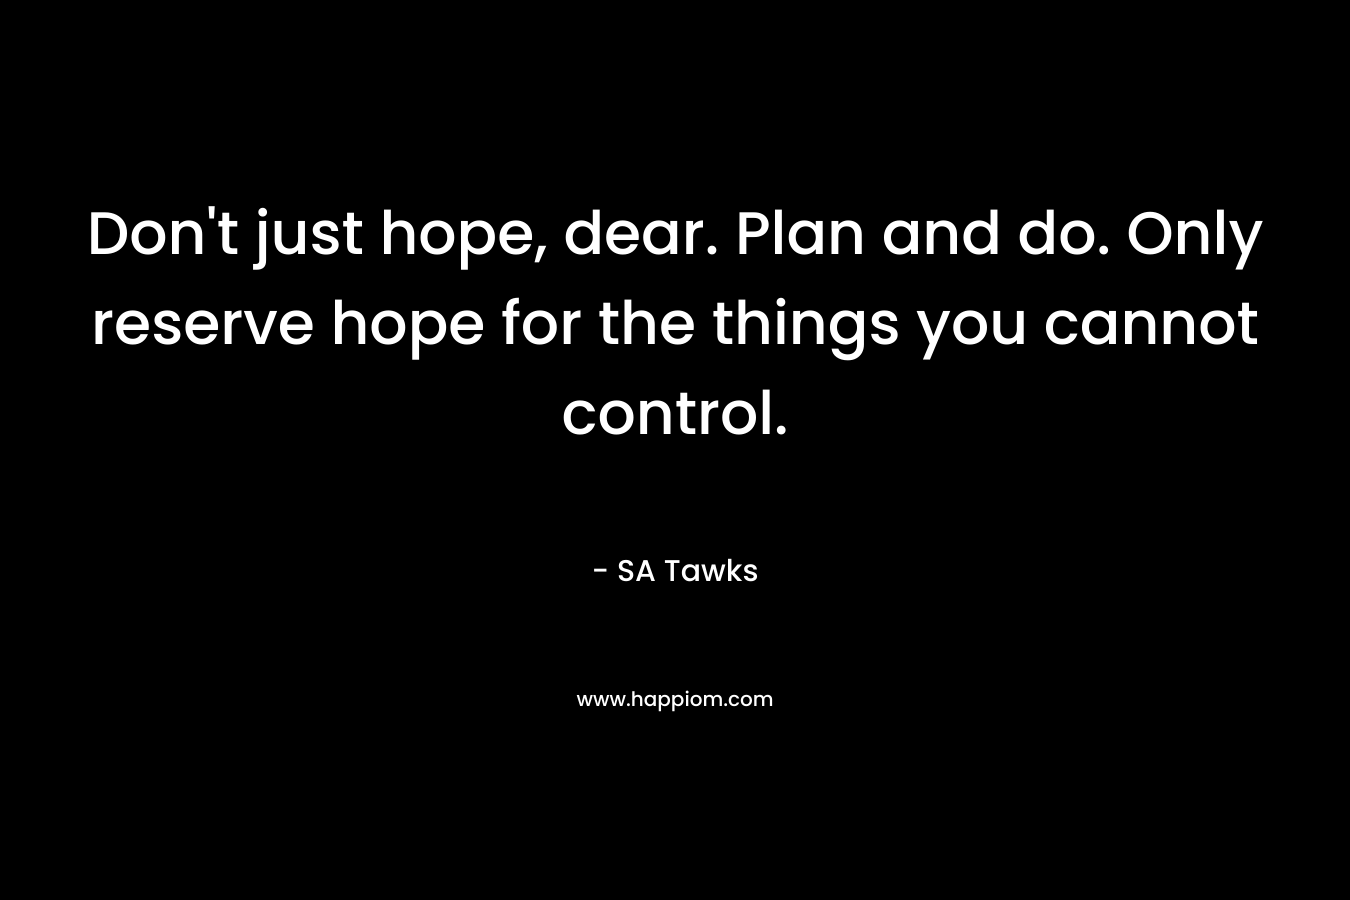 Don’t just hope, dear. Plan and do. Only reserve hope for the things you cannot control. – SA Tawks